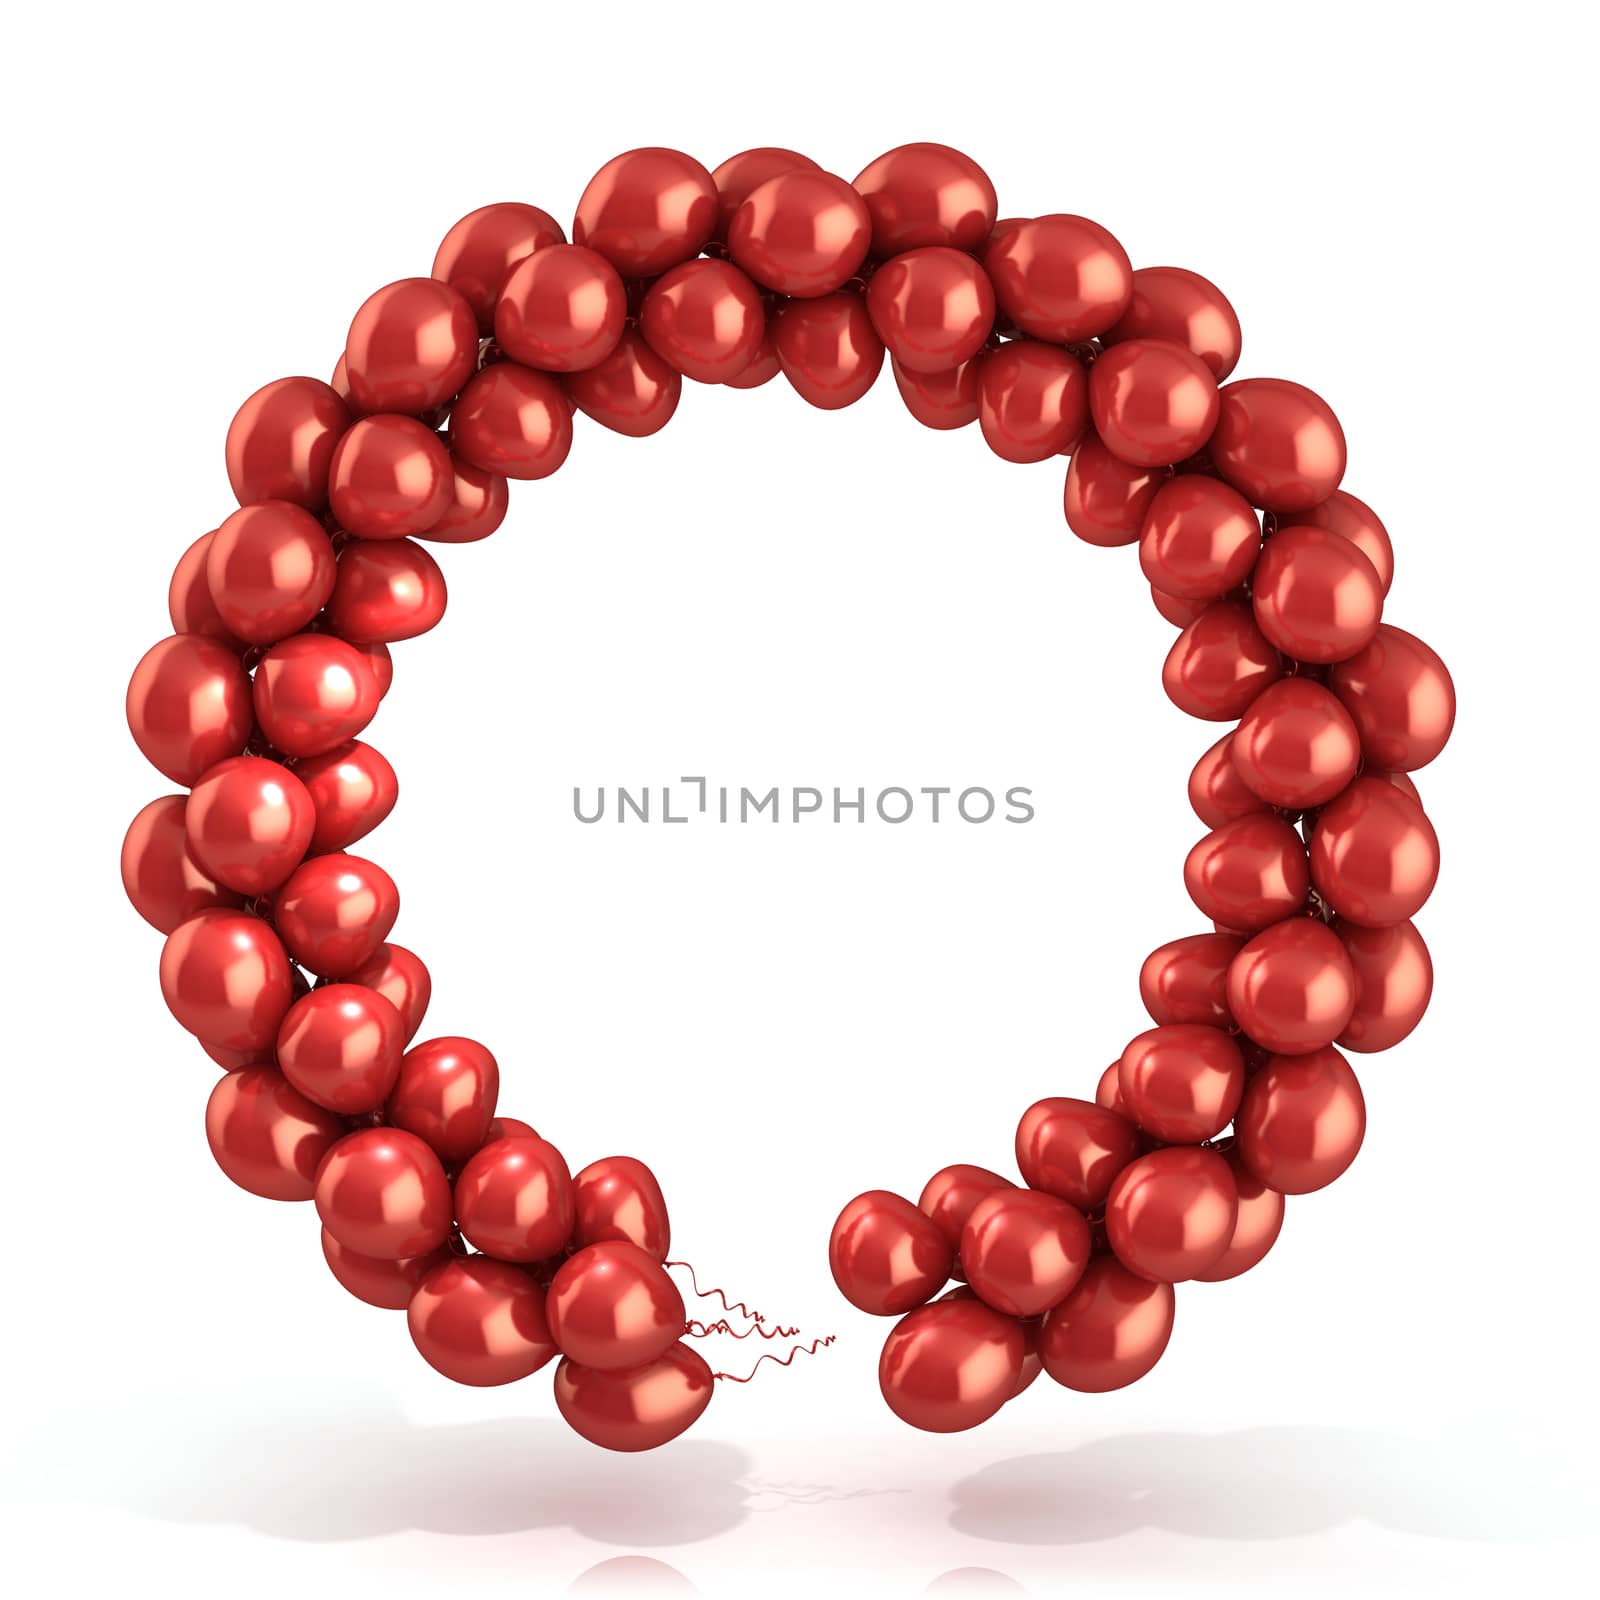 Red balloons wreath, isolated on white